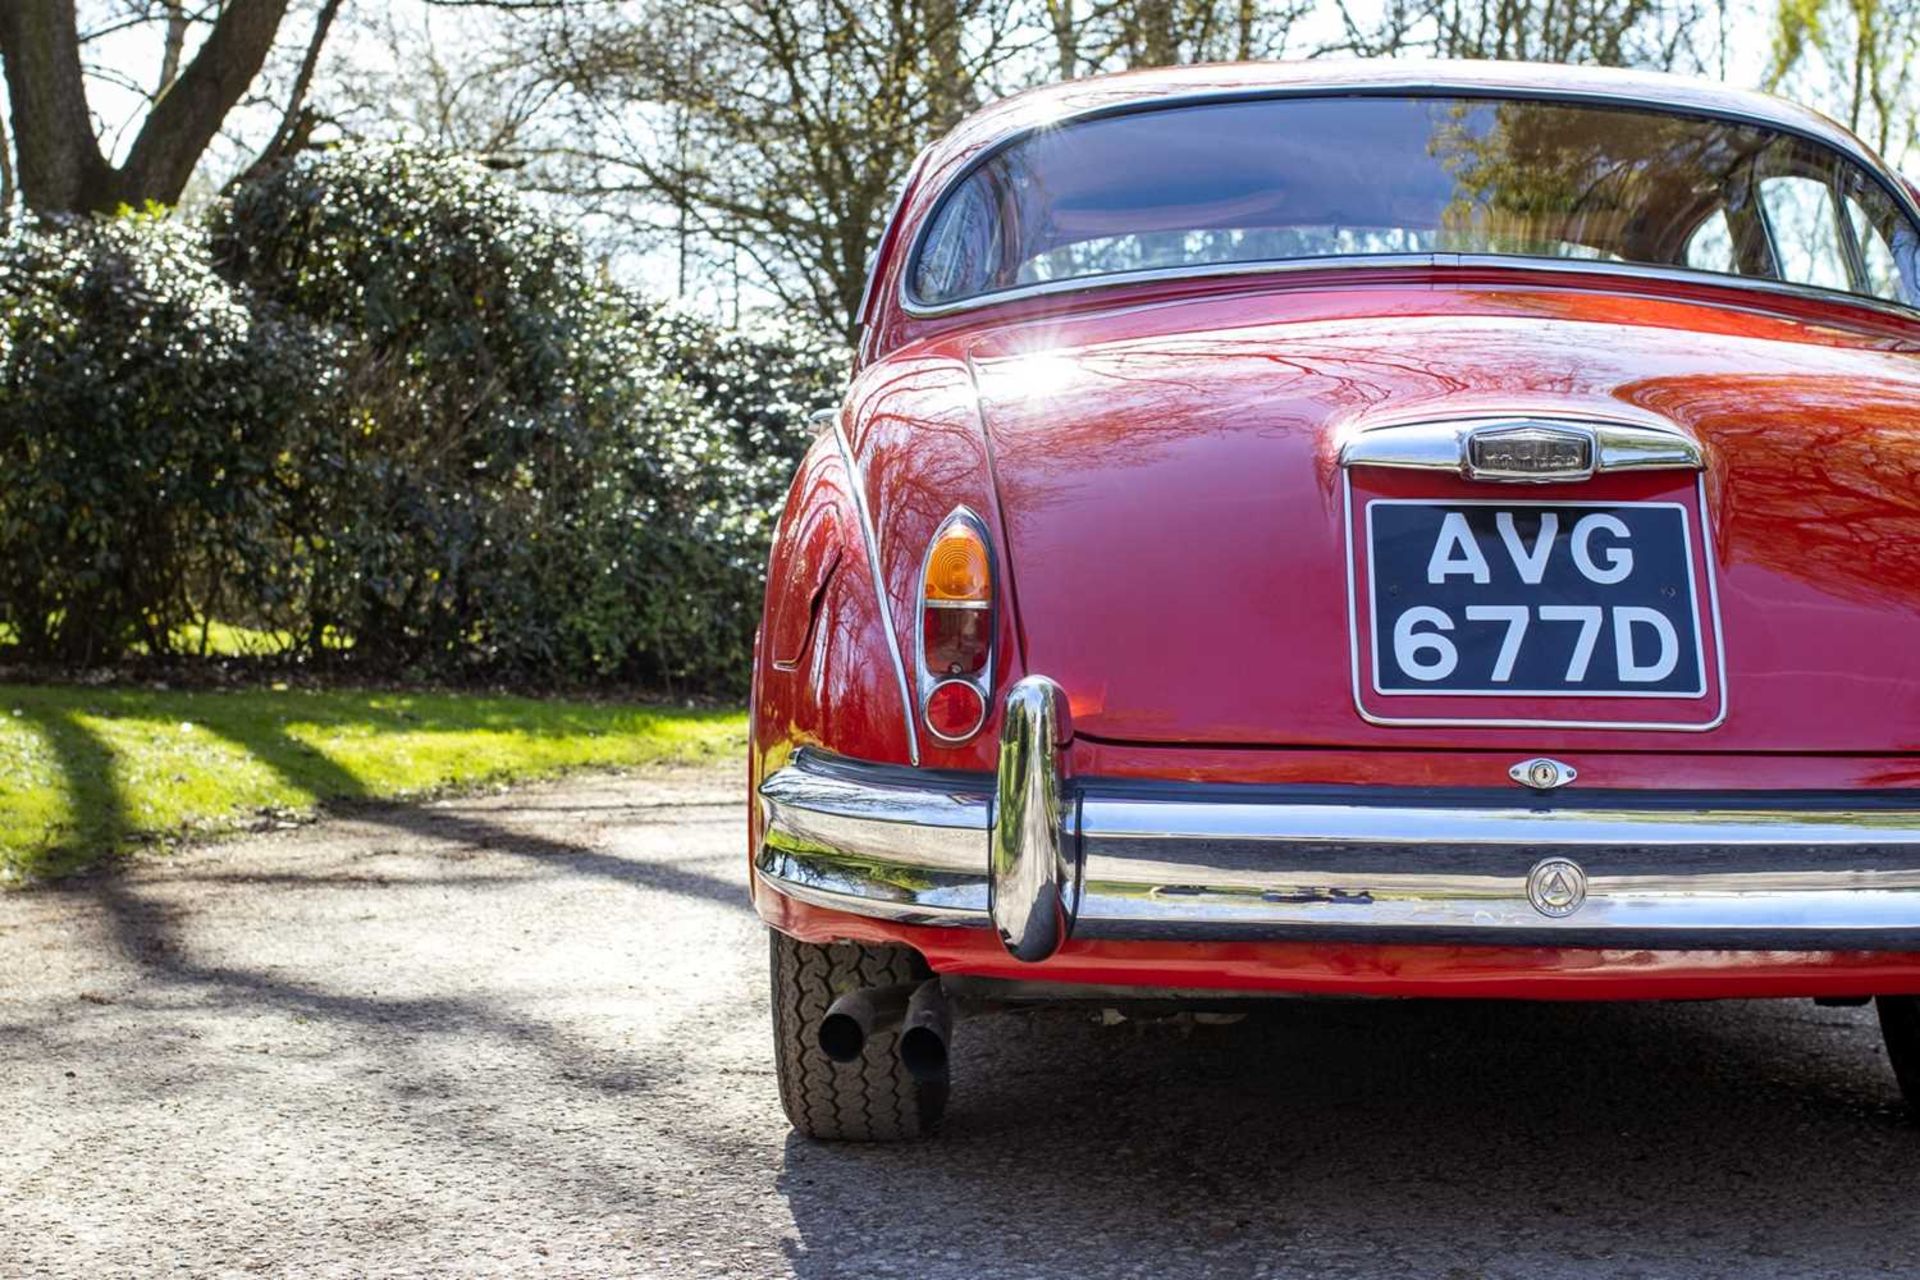 1966 Jaguar MKII 2.4 Believed to have covered a credible 19,000 miles, one former keeper  - Image 45 of 86